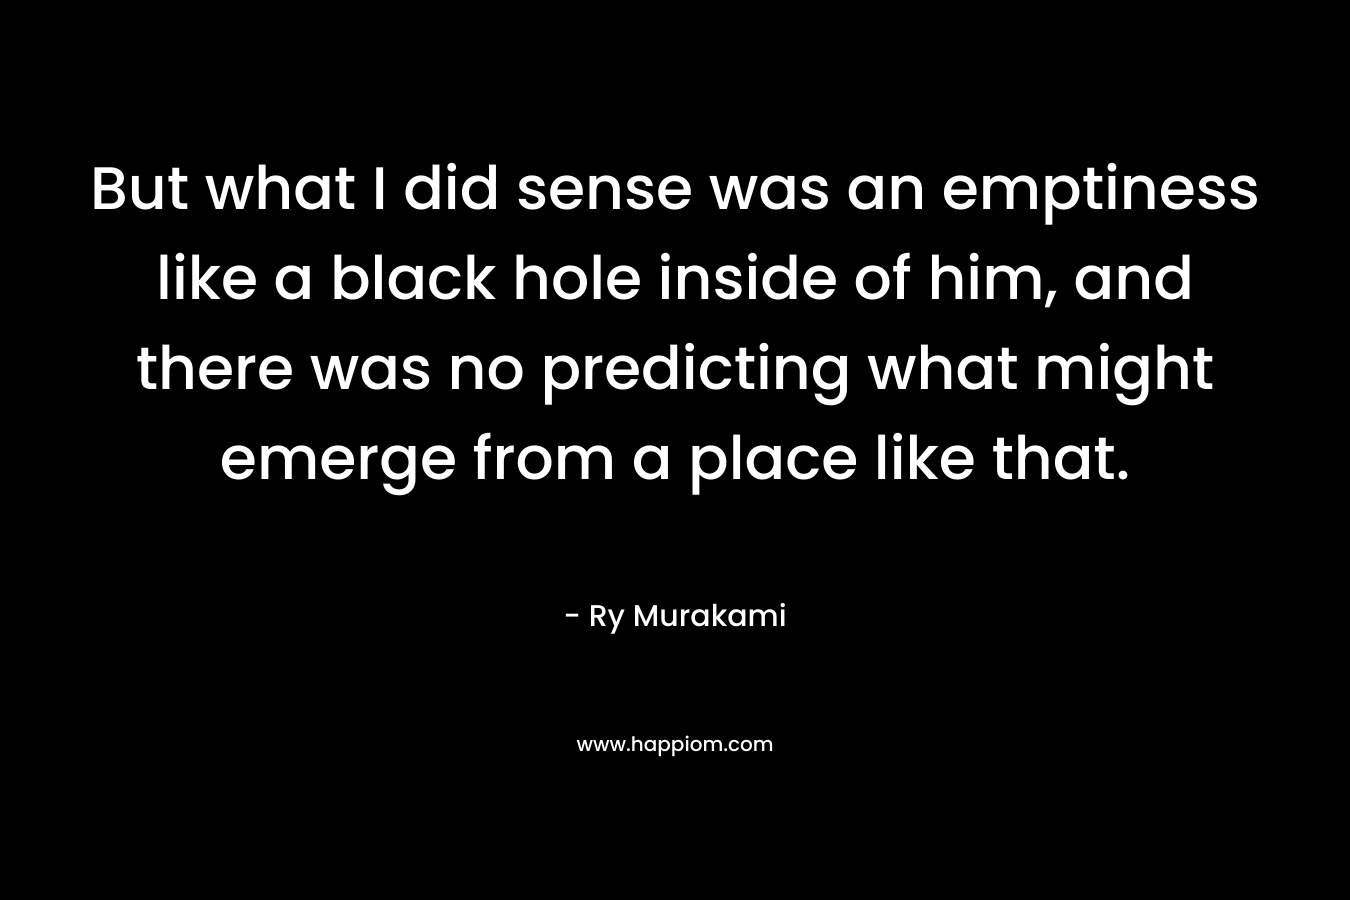 But what I did sense was an emptiness like a black hole inside of him, and there was no predicting what might emerge from a place like that. – Ry Murakami